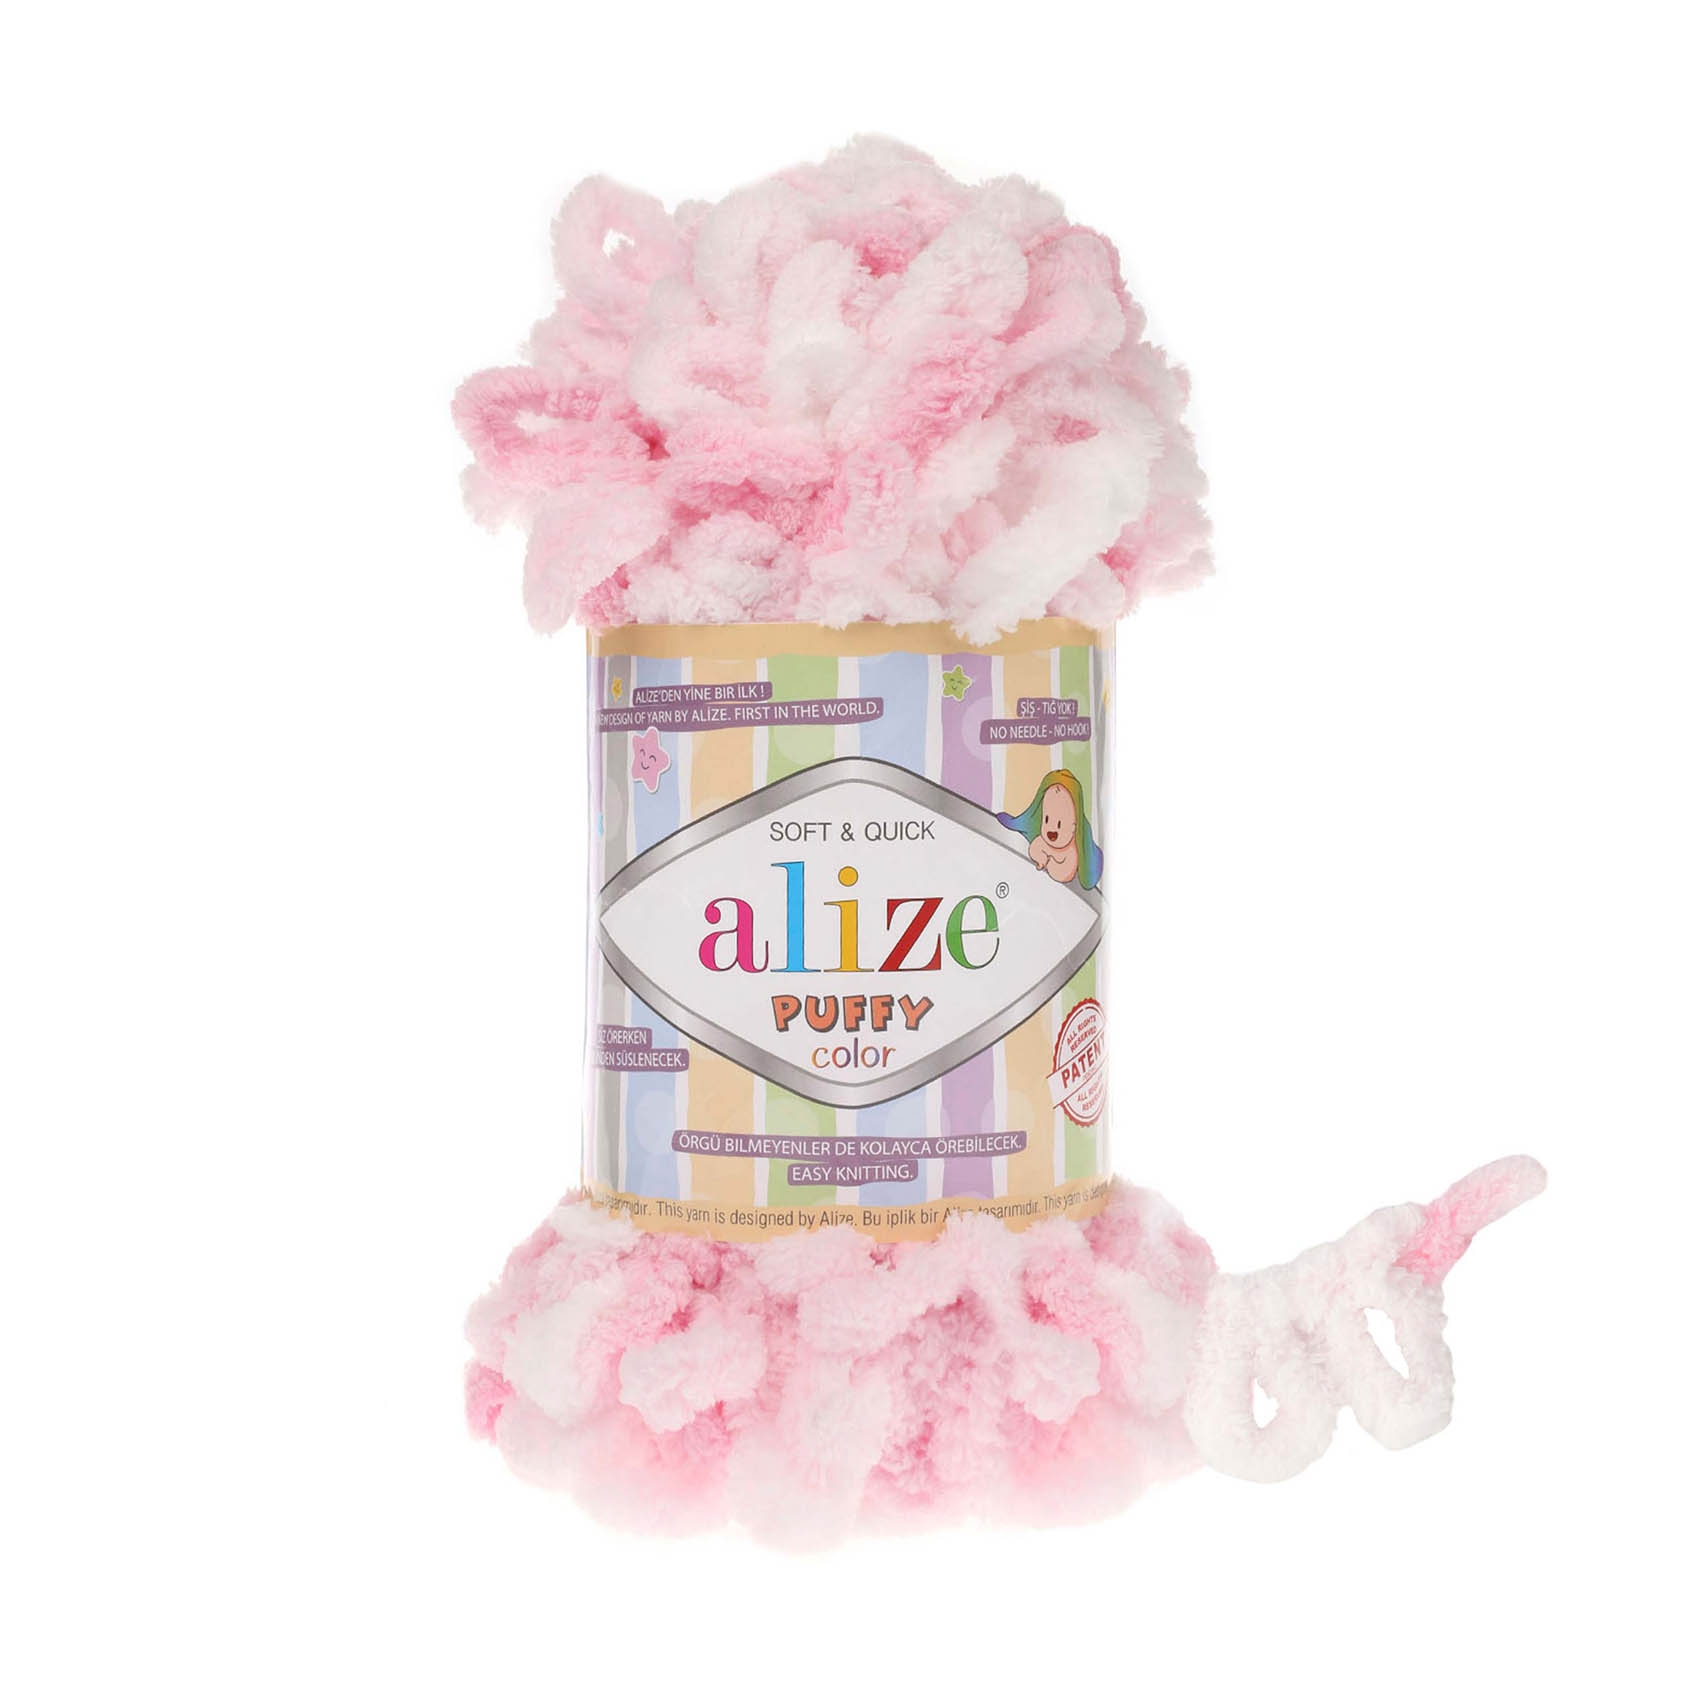 Alize%20Puffy%20Color%205863